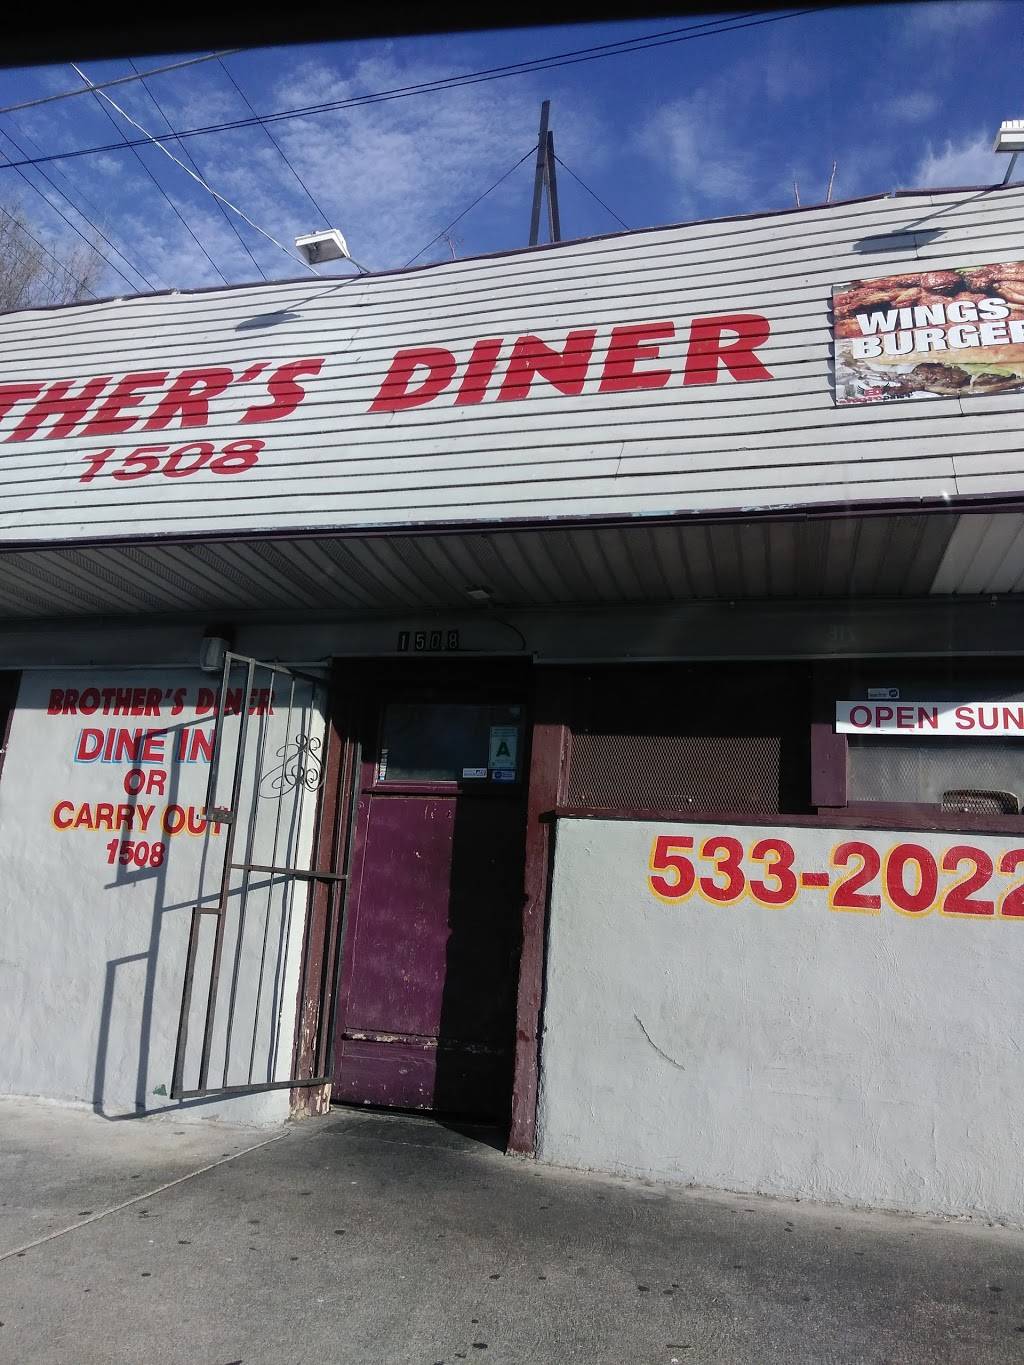 Brothers Diner | restaurant | 1508 Whittier St, St. Louis, MO 63113, USA | 3145332022 OR +1 314-533-2022